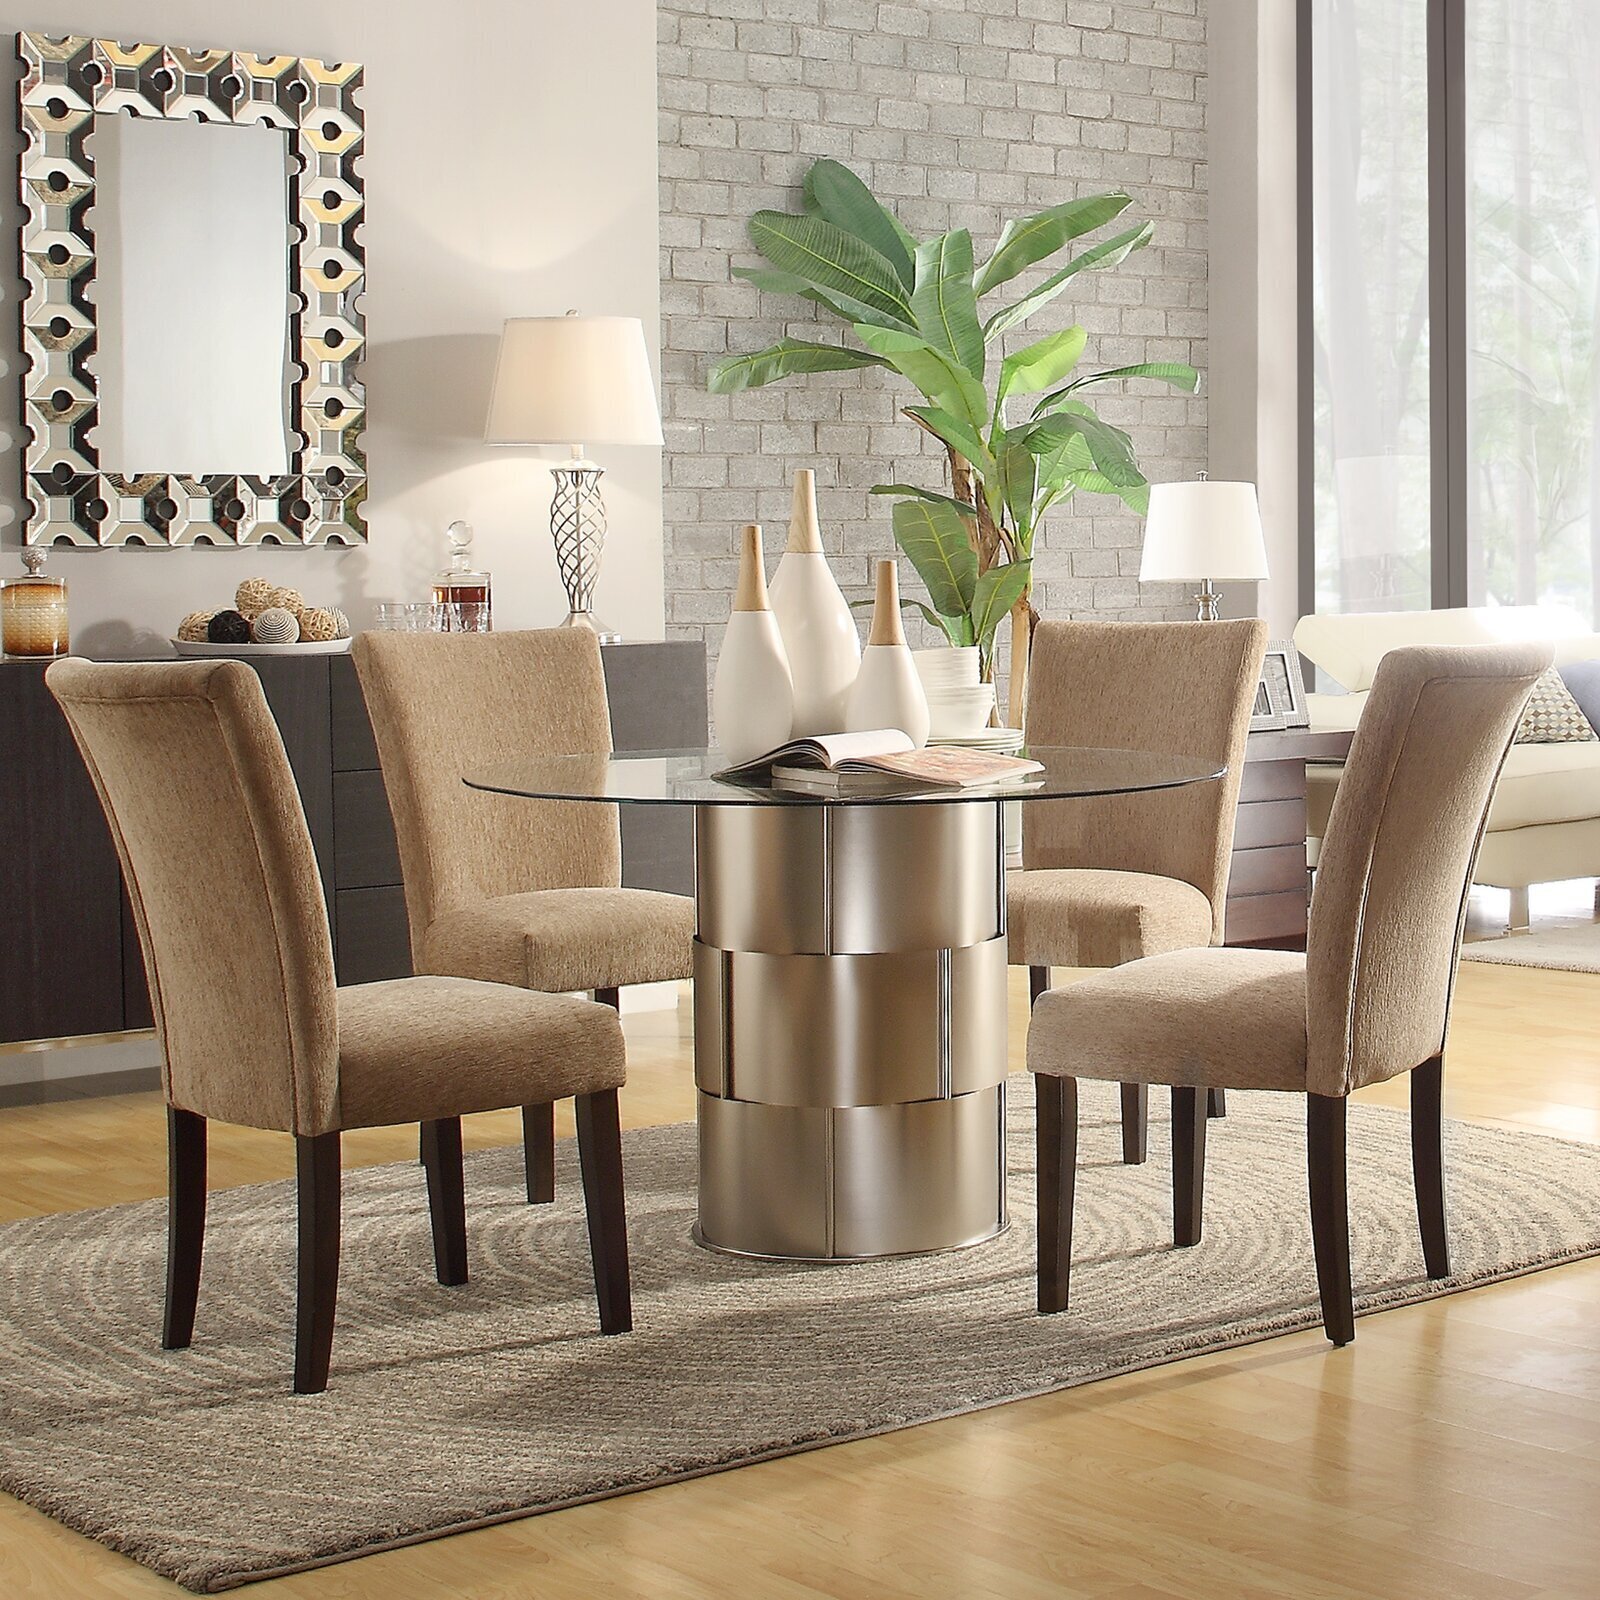 Glamorous Chrome and Upholstered Combo for Four